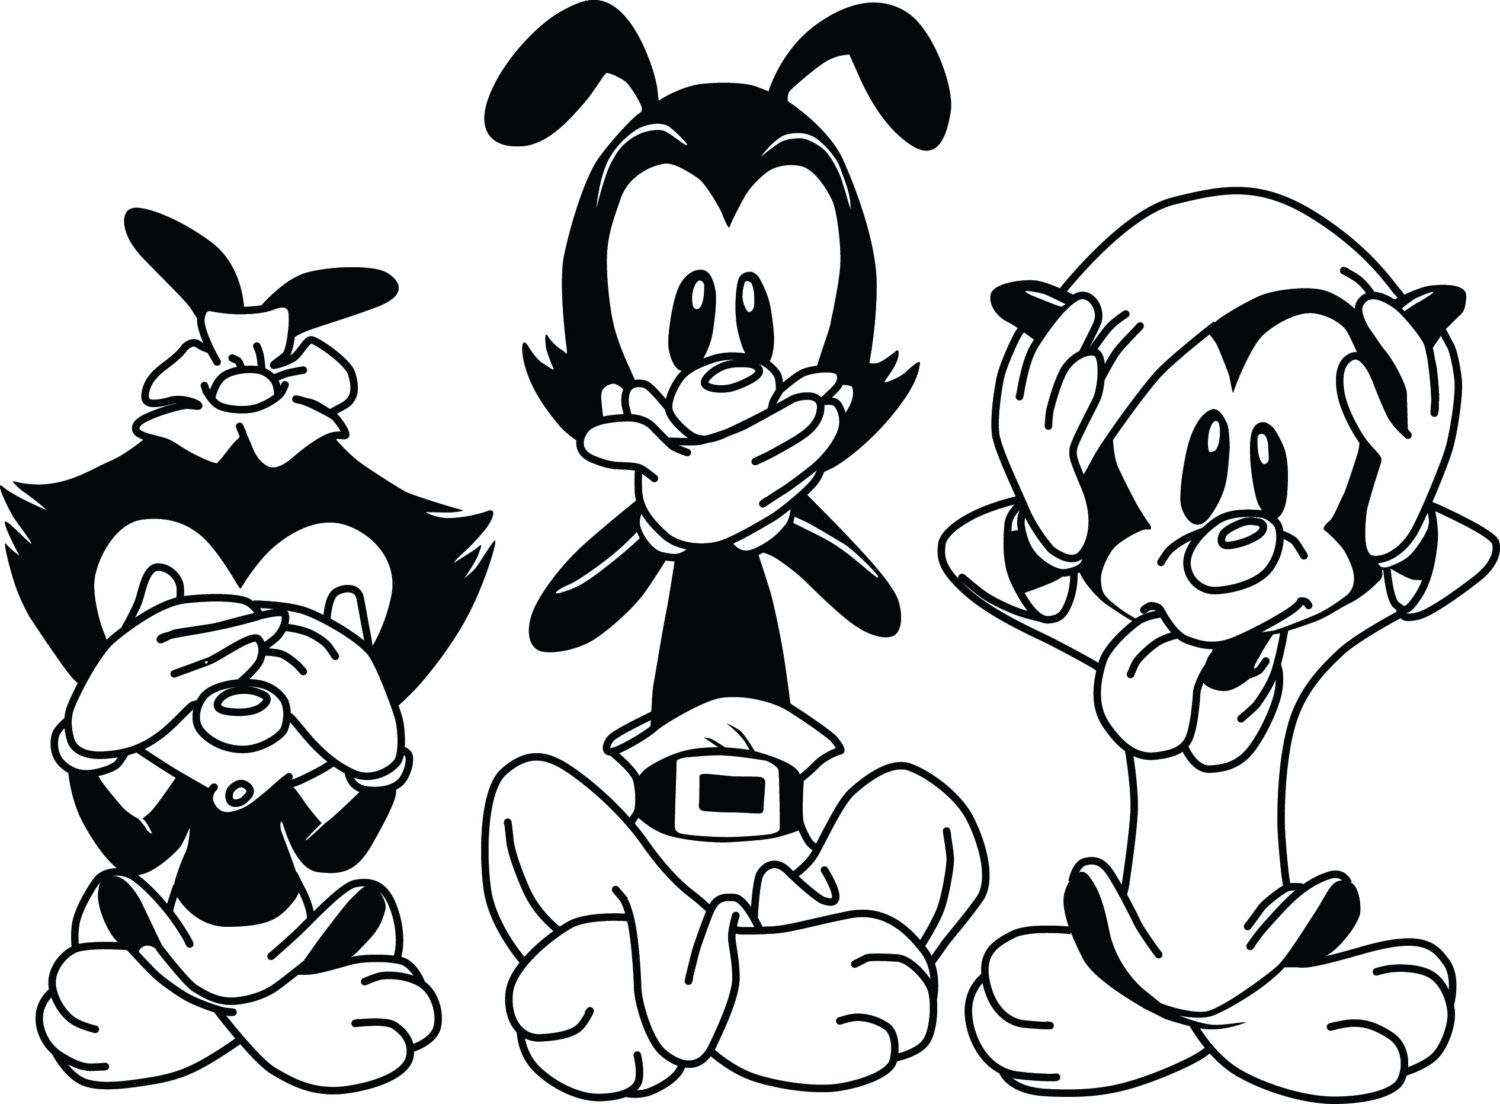 Printable Animaniacs Coloring Pages Pdf For Kids - Animaniacs